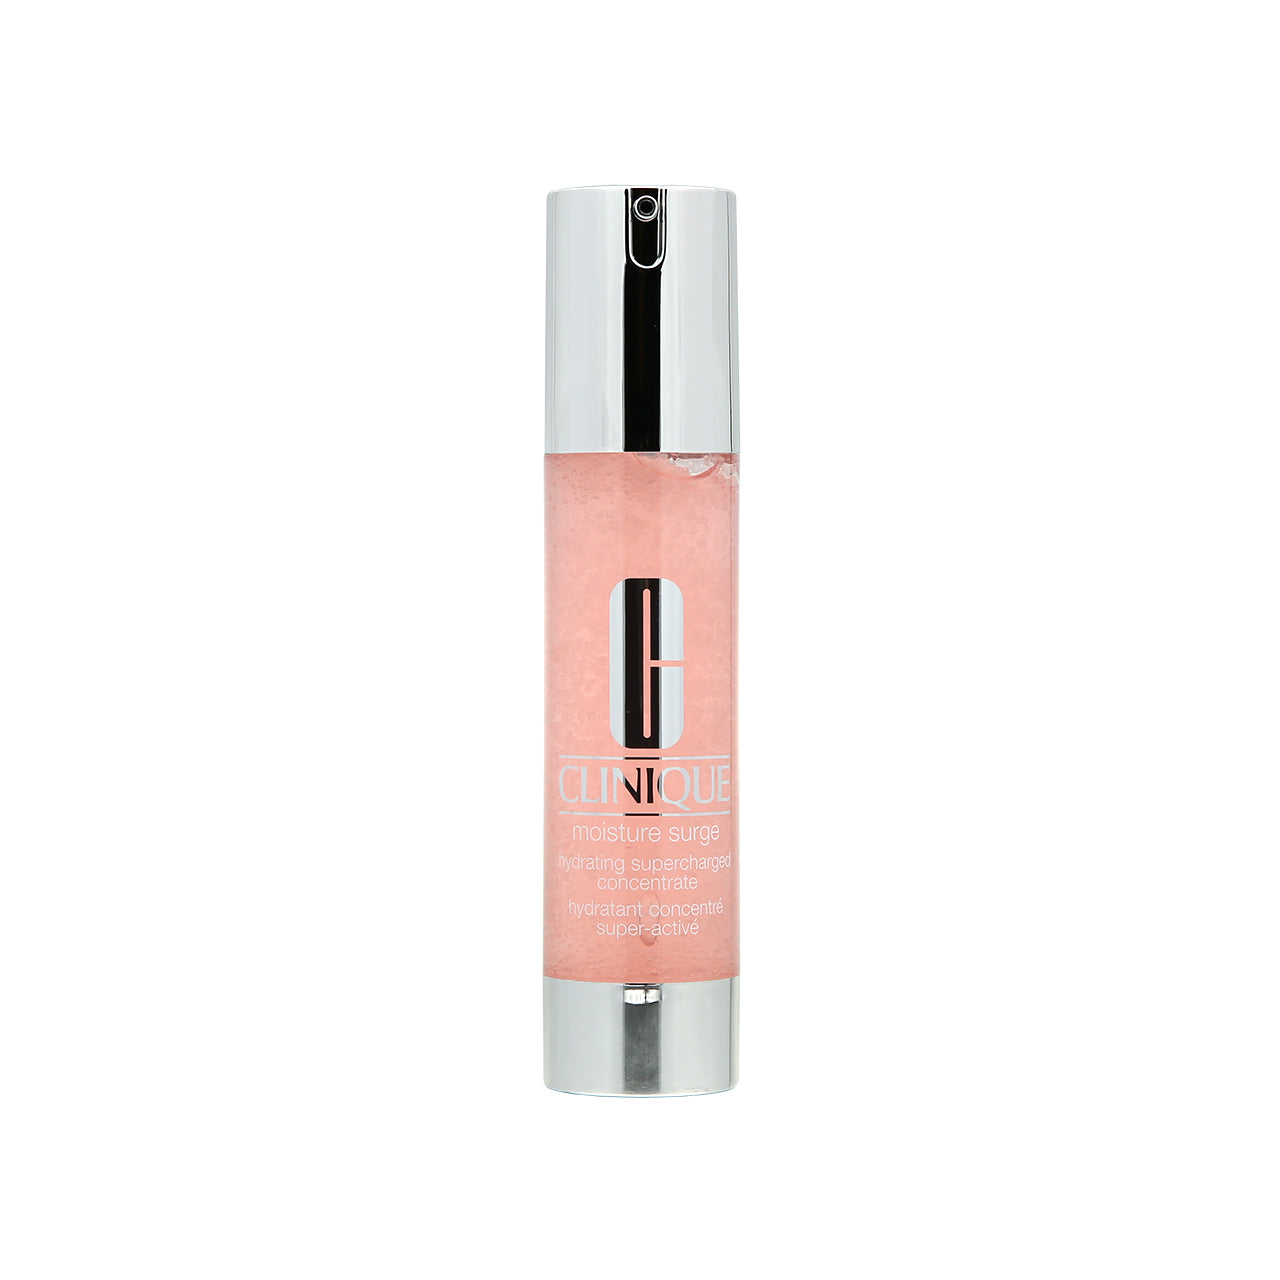 Clinique Moisture Surge™ Hydrating Supercharged Concentrate 48ml | Sasa Global eShop